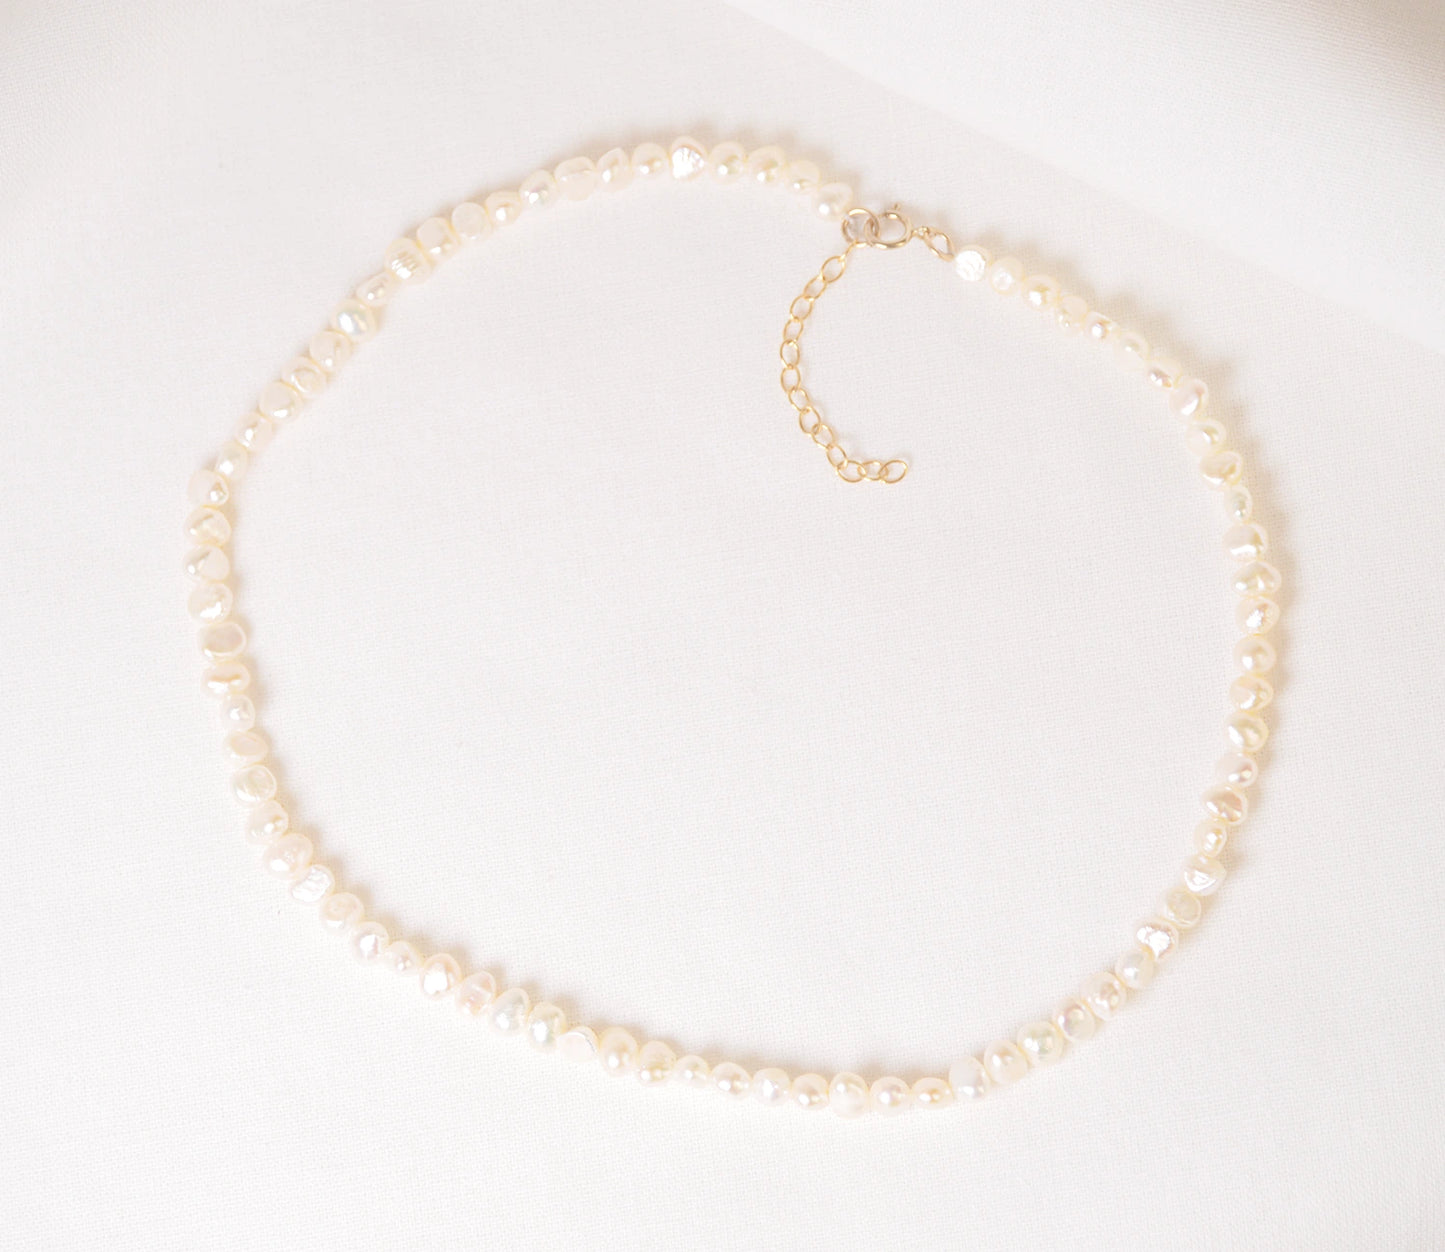 Gold freshwater Pearl Choker Necklace Set